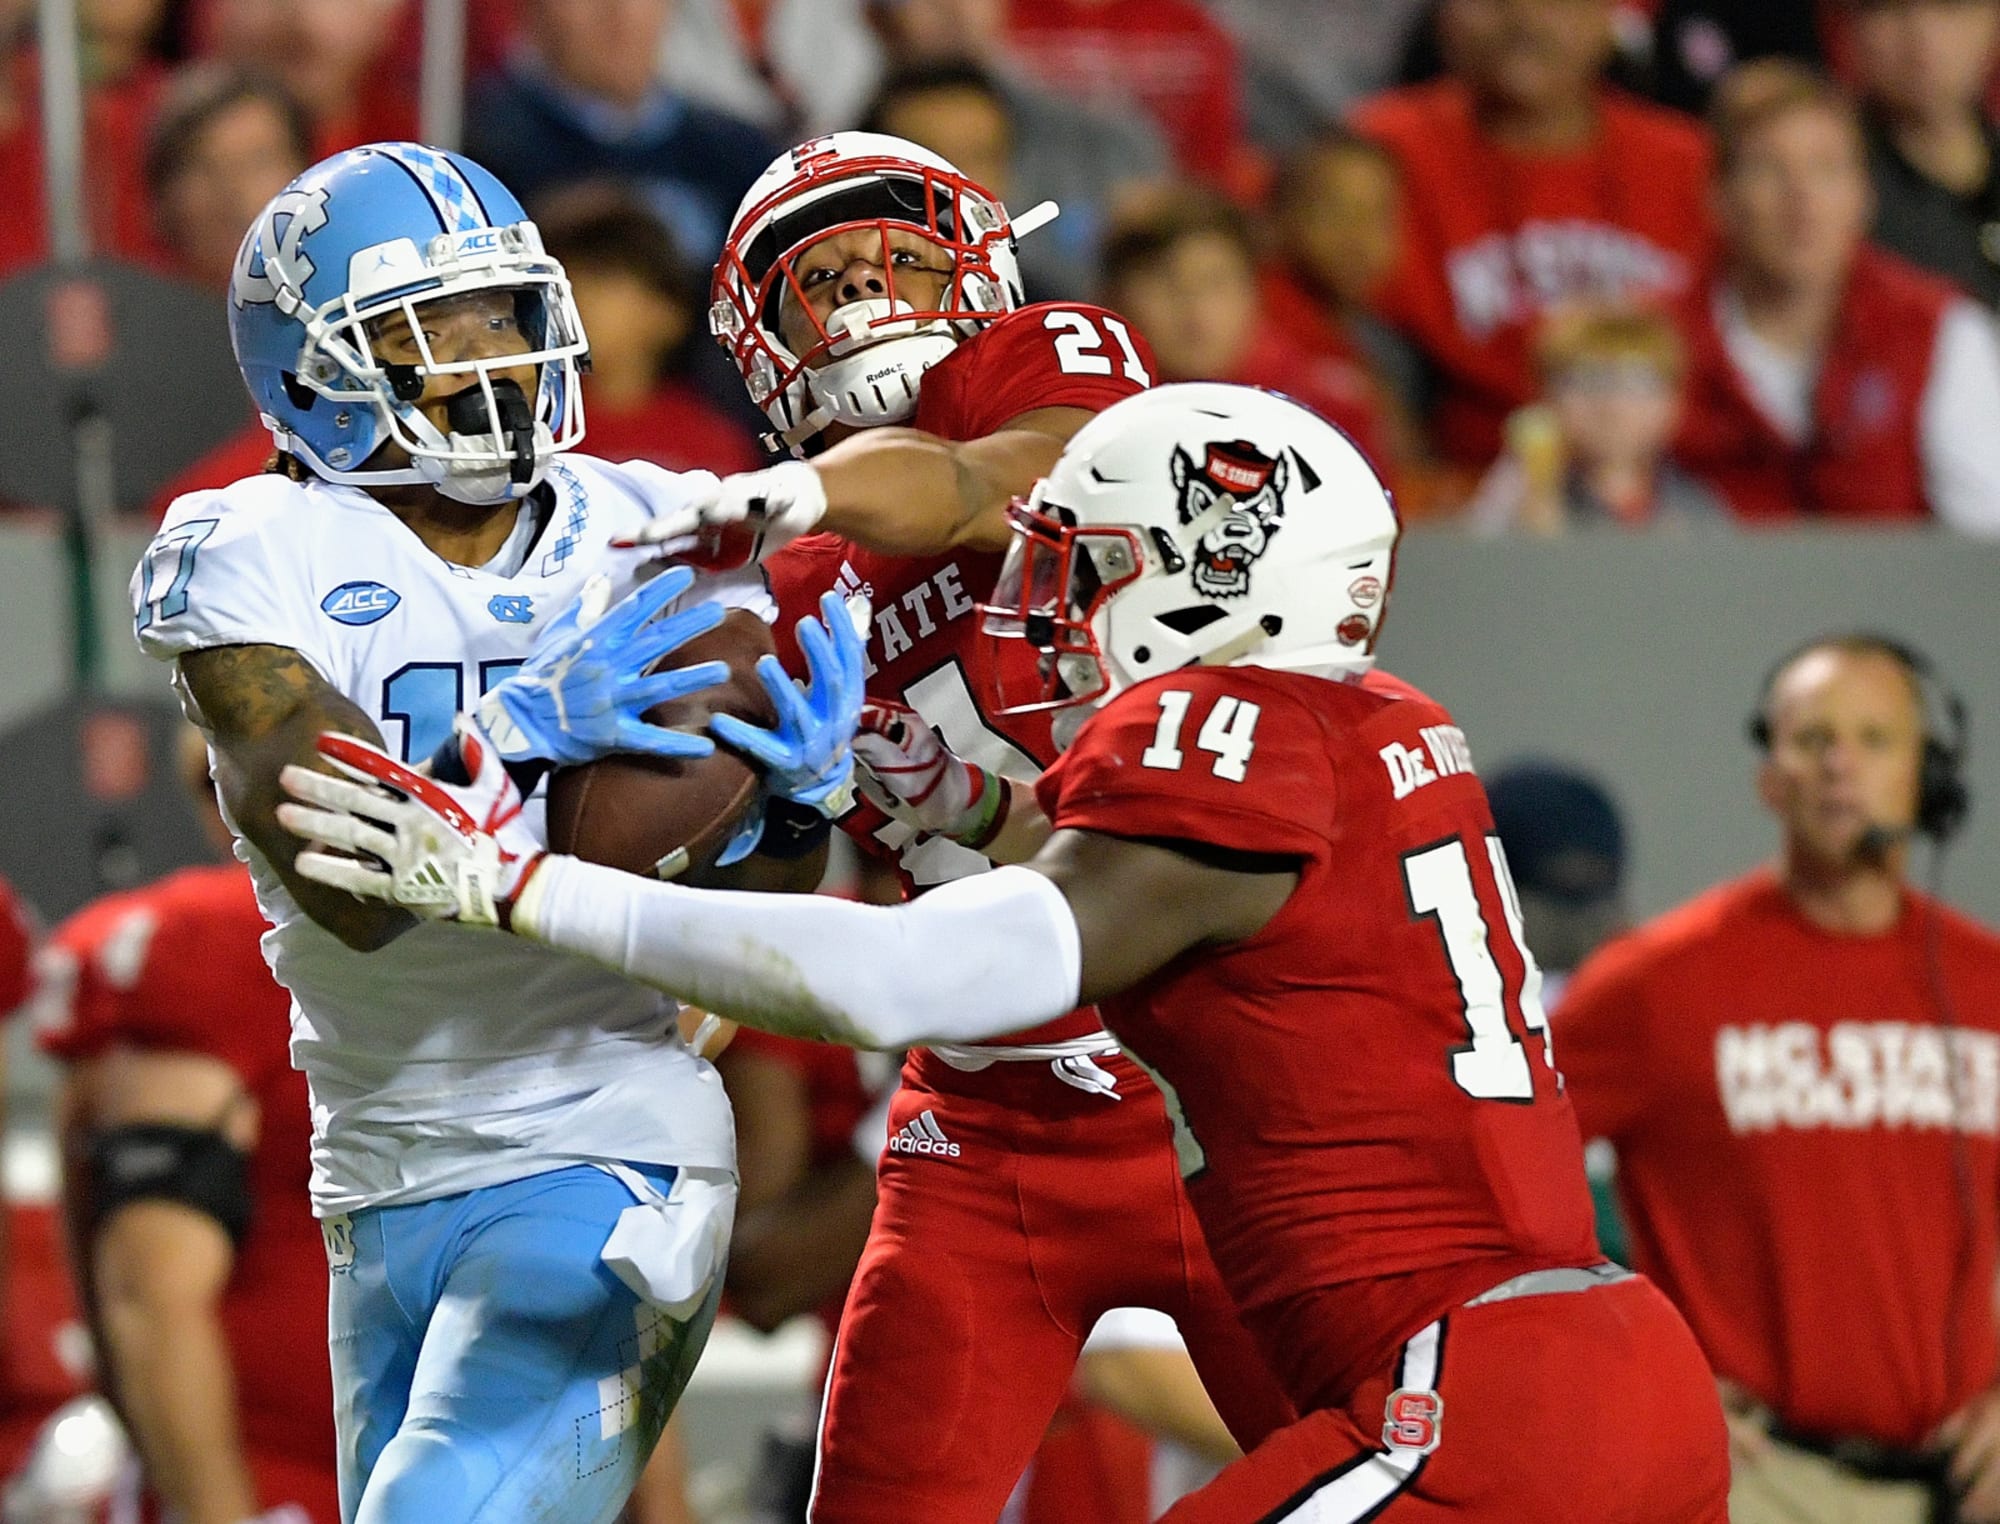 UNC Football early opponent preview: Louisville Cardinals